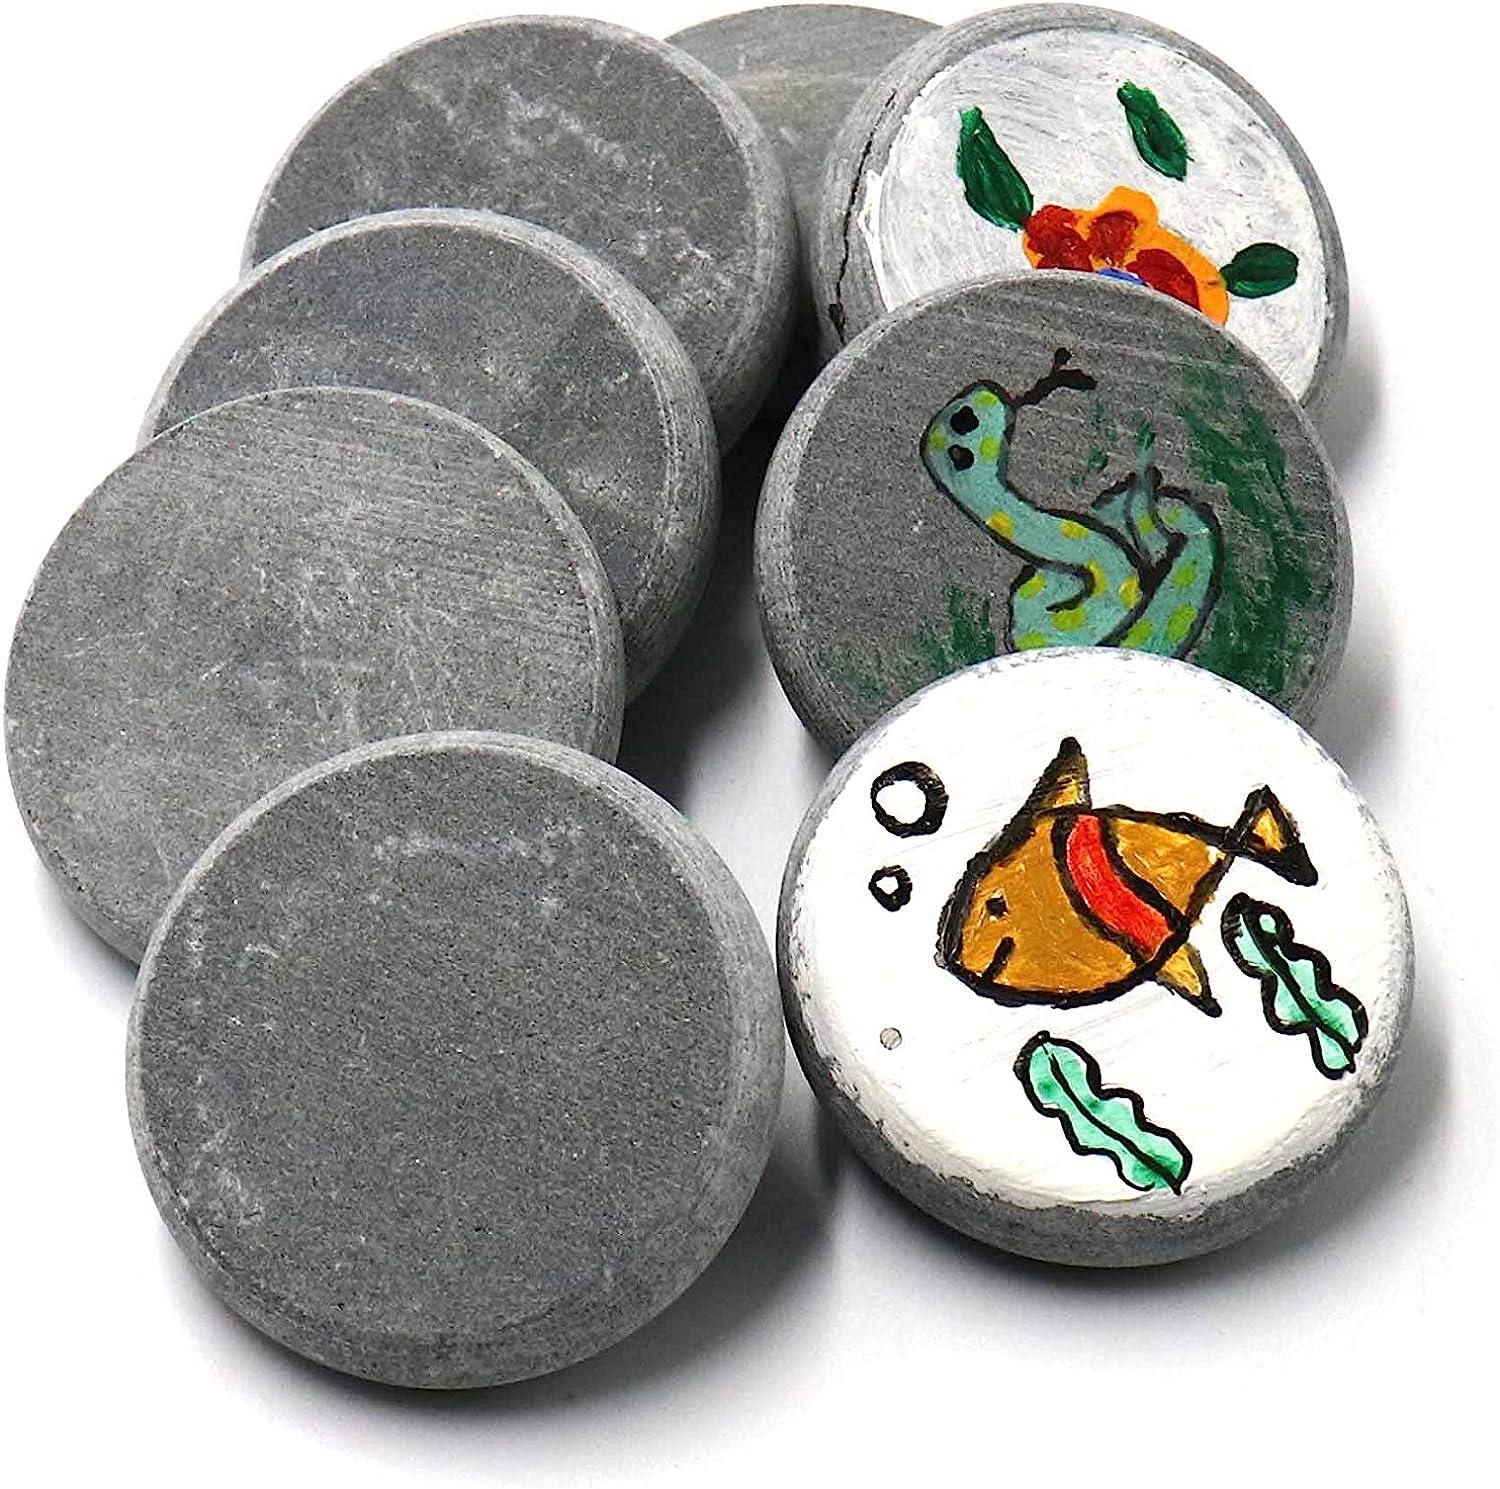 River Rocks for Painting, 20 Piece 1 to 2 inches Painting Rocks Unpolished  Stones Smooth Naturally Stones for Kids Party,Crafts, and Decoration